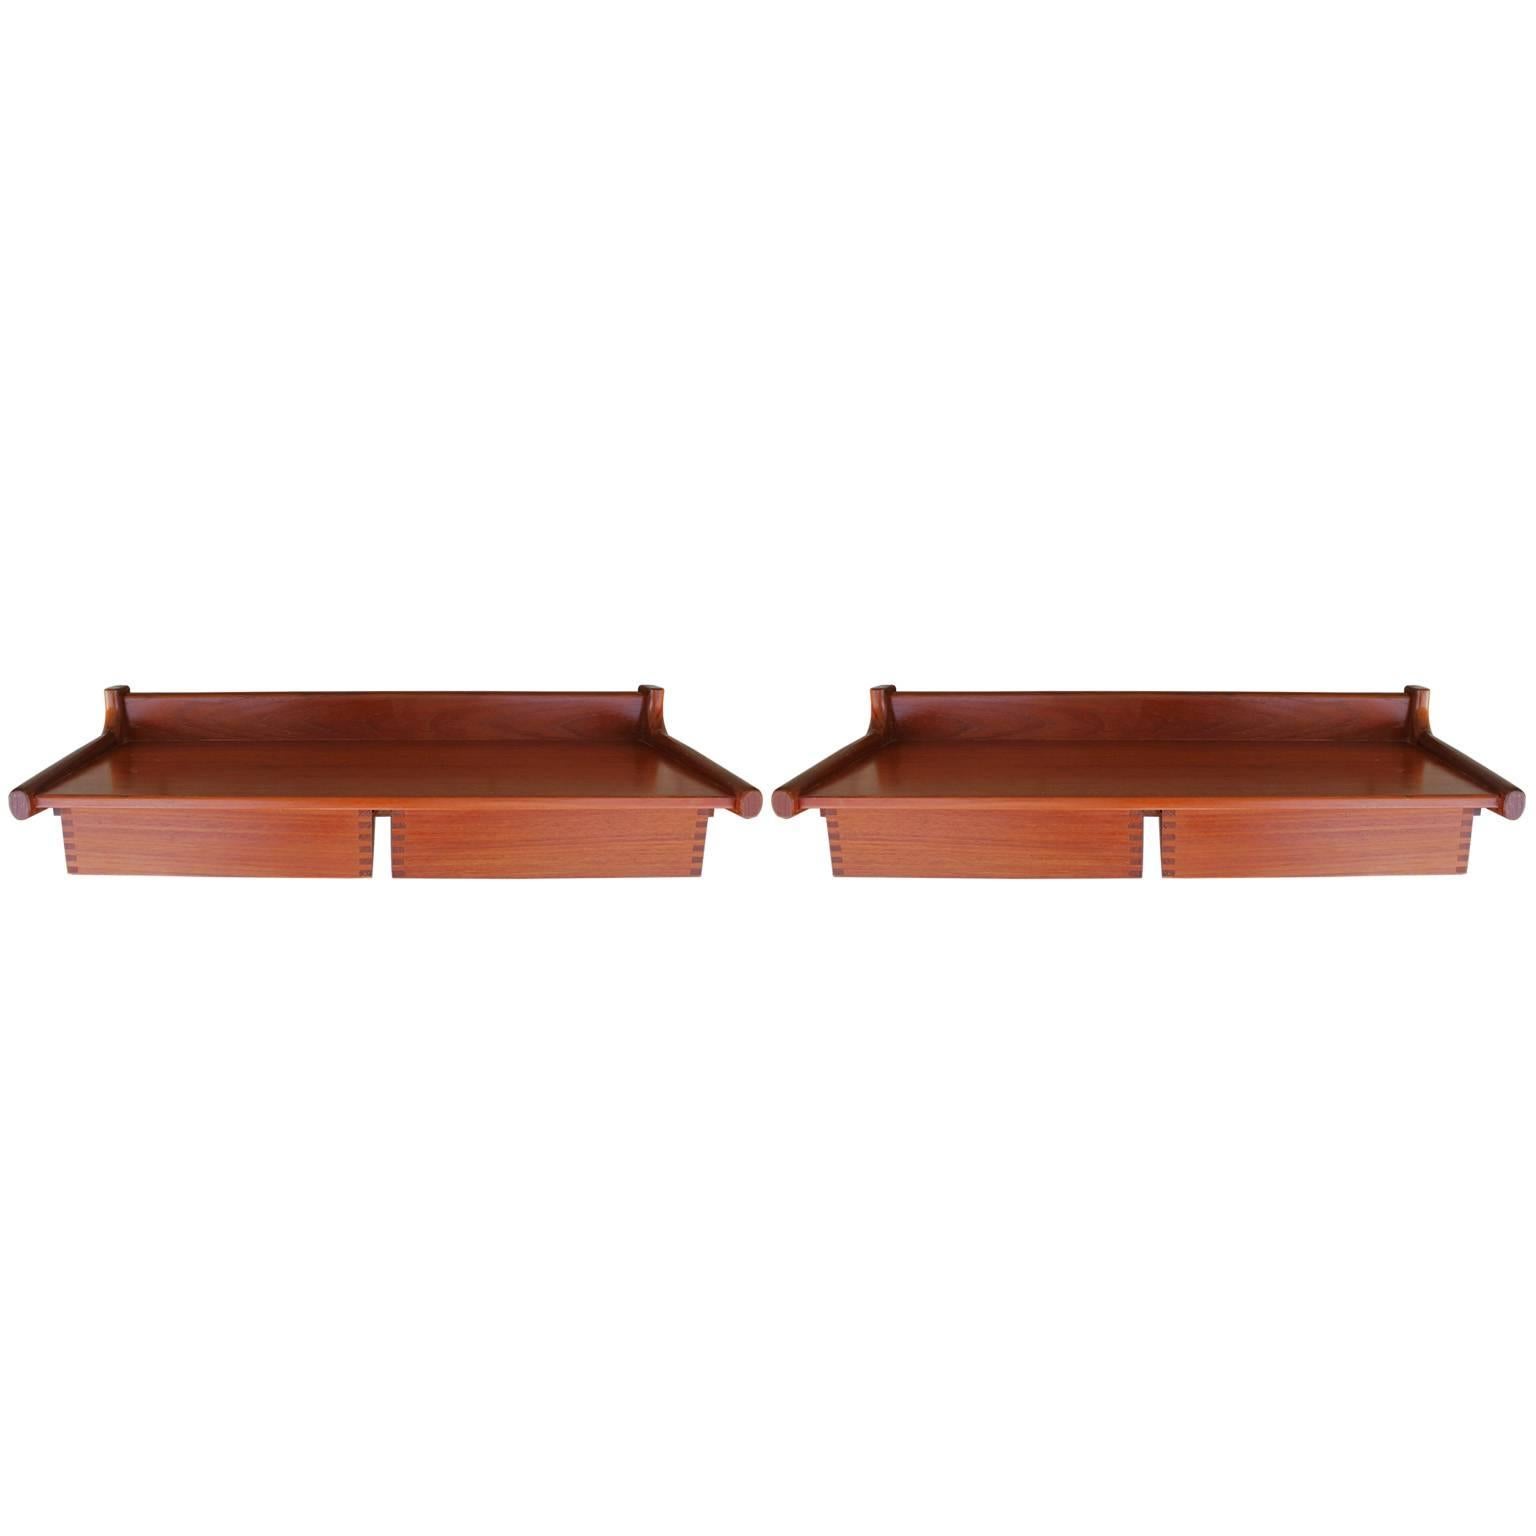 Beautiful pair of teak floating nightstands or shelves attributed to Borge Mogensen. These wall mounted nightstands feature two pull out drawers with delicate finger joints. These easily mount with screws to the back. They would be perfect in a